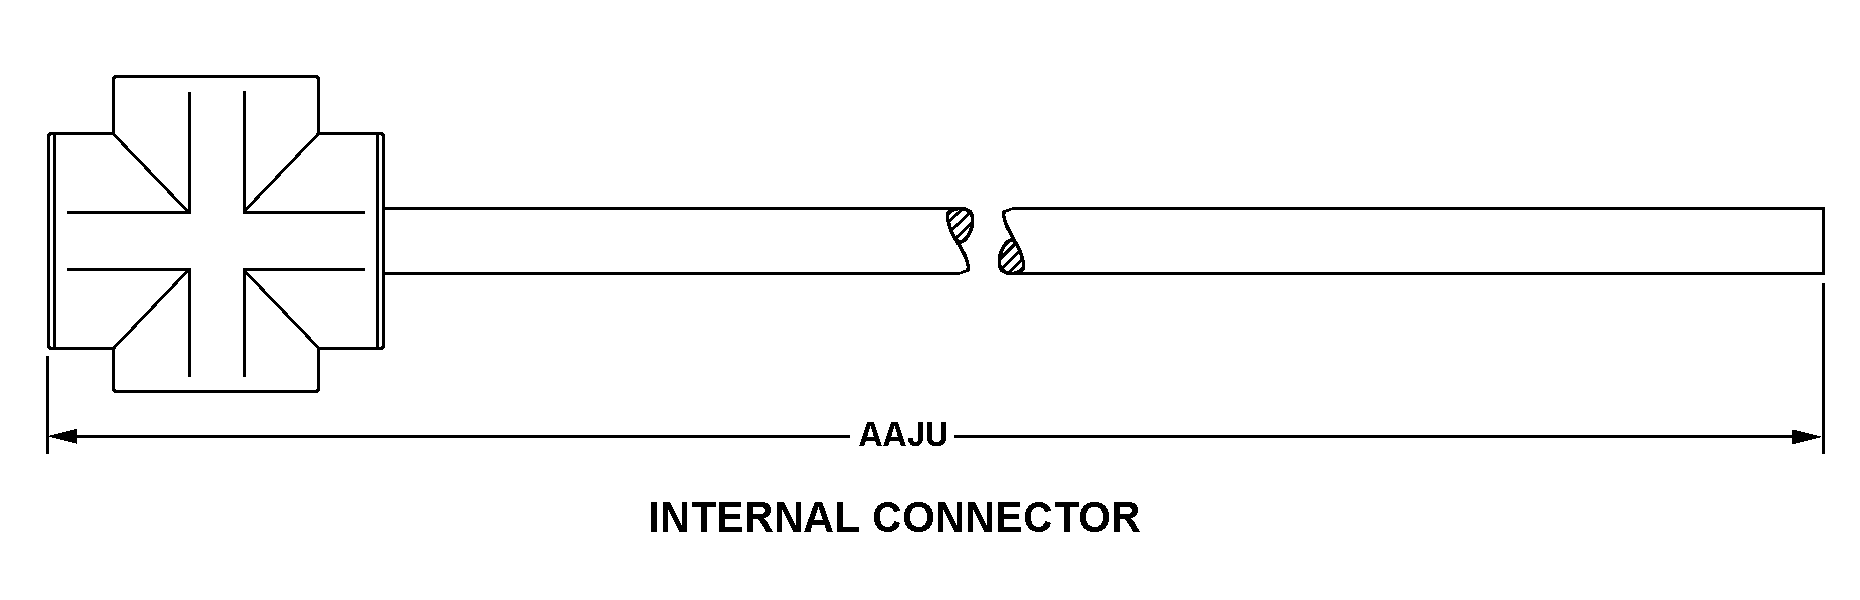 INTERNAL CONNECTOR style nsn 6150-01-166-4564